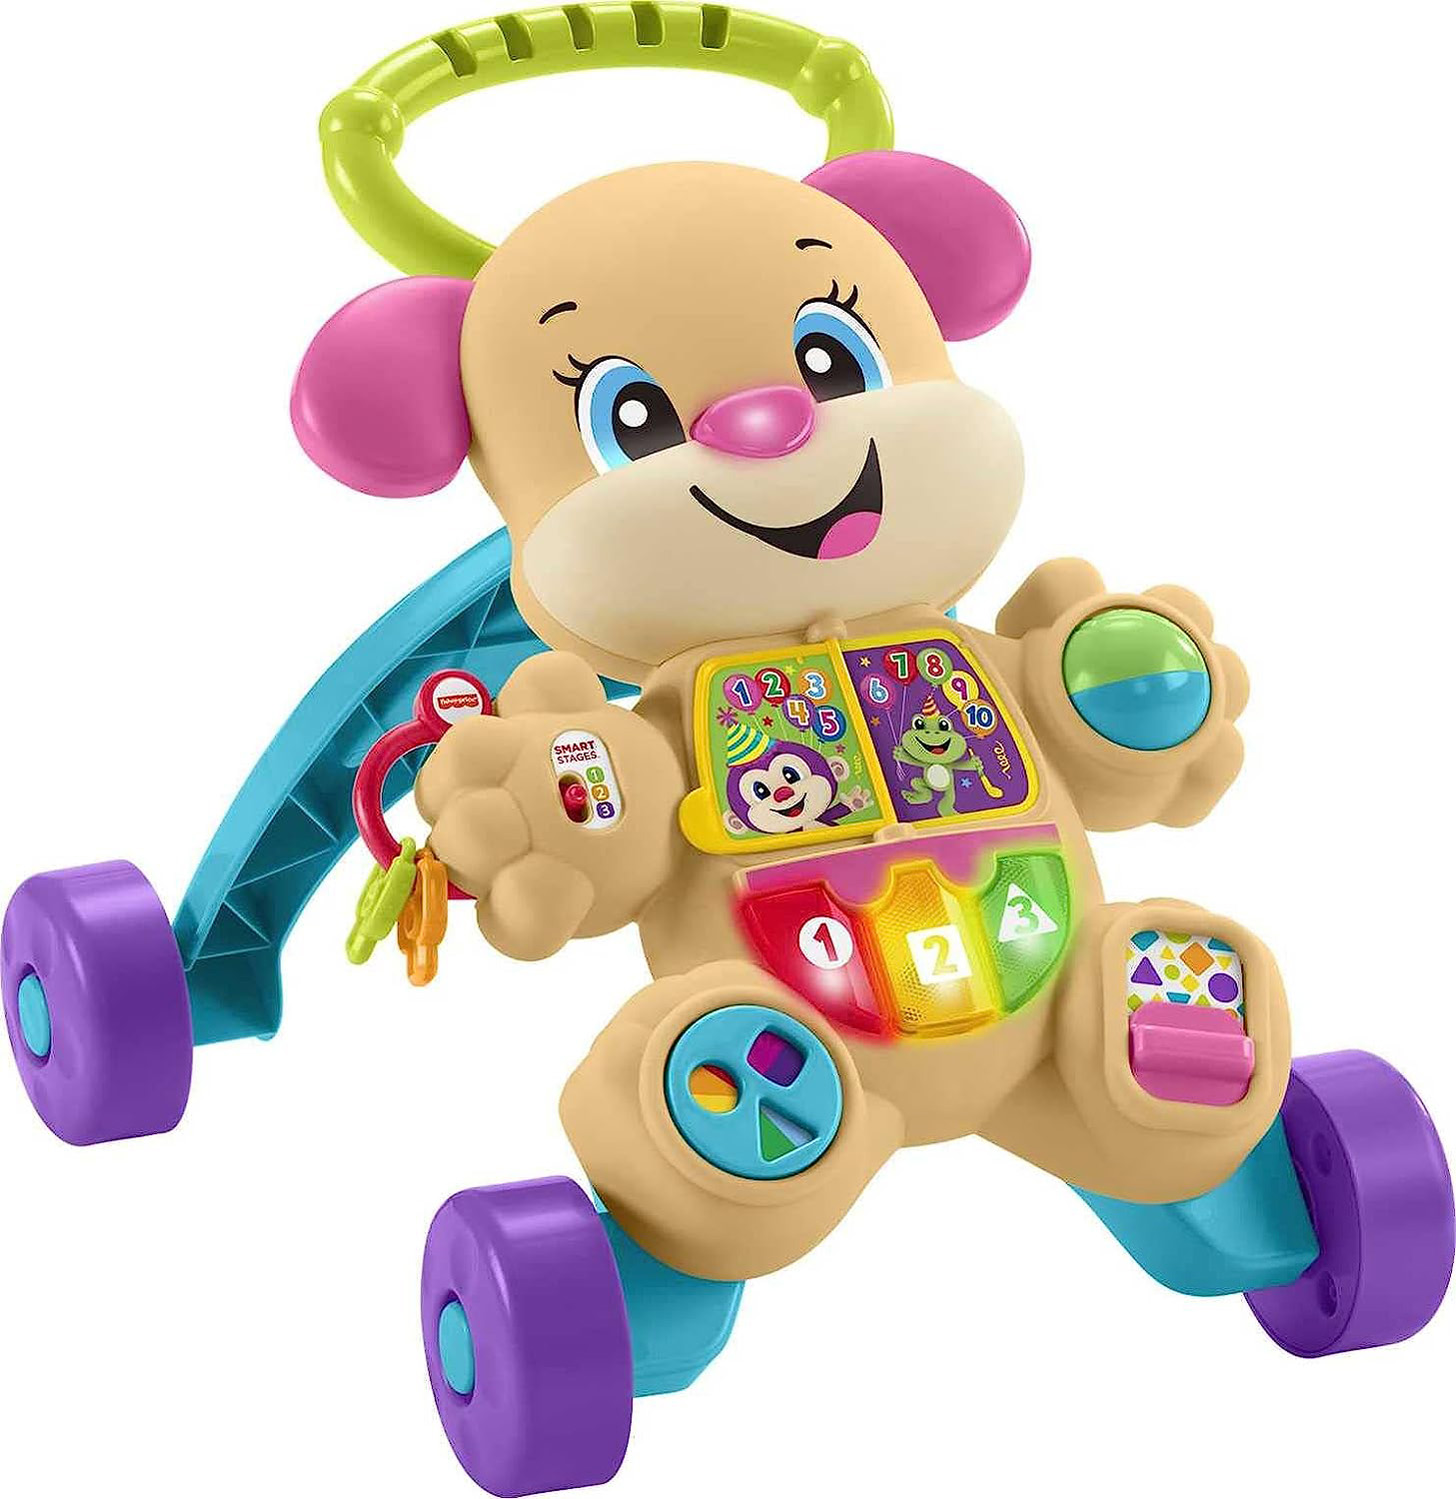 Fisher-Price Laugh & Learn Smart Stages Learn with Sis Walker, Musical Walking Toy for Babies and Toddlers Ages 6 to 36 Months